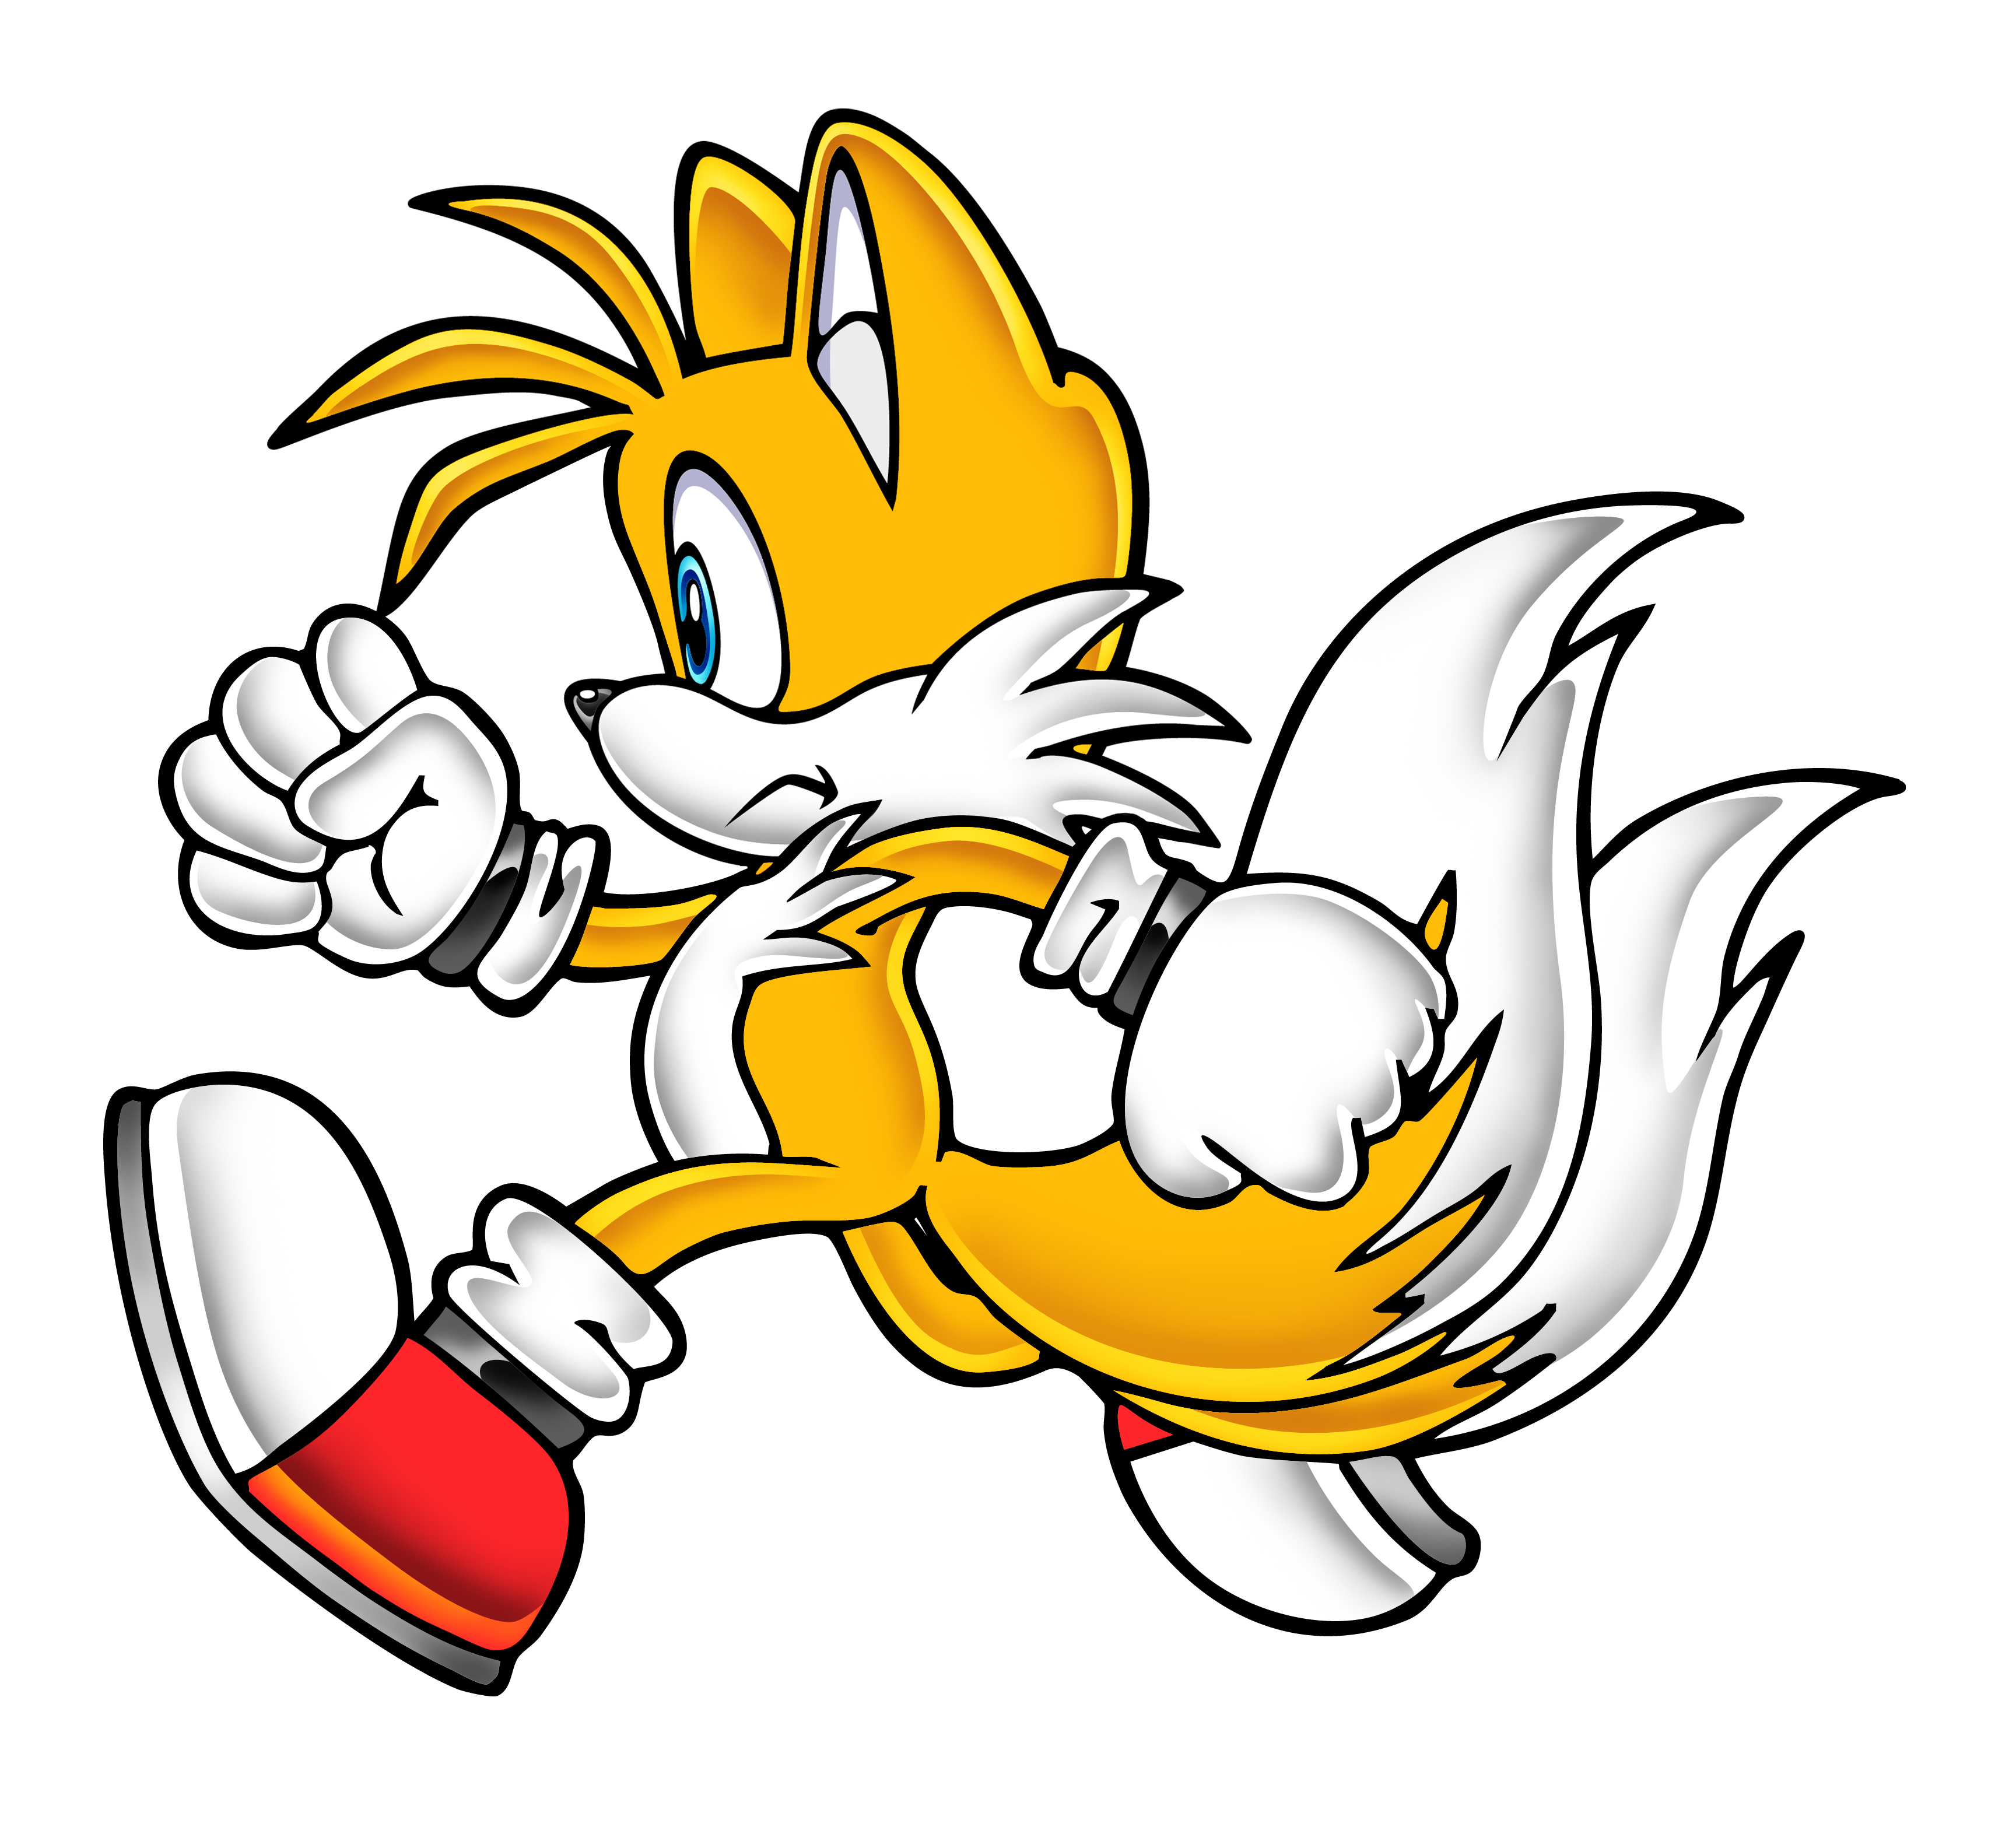 Tails from the official artwork set for #SonictheHedgehog 2 on #SegaGenesis  and #Megadrive. #Sonic.